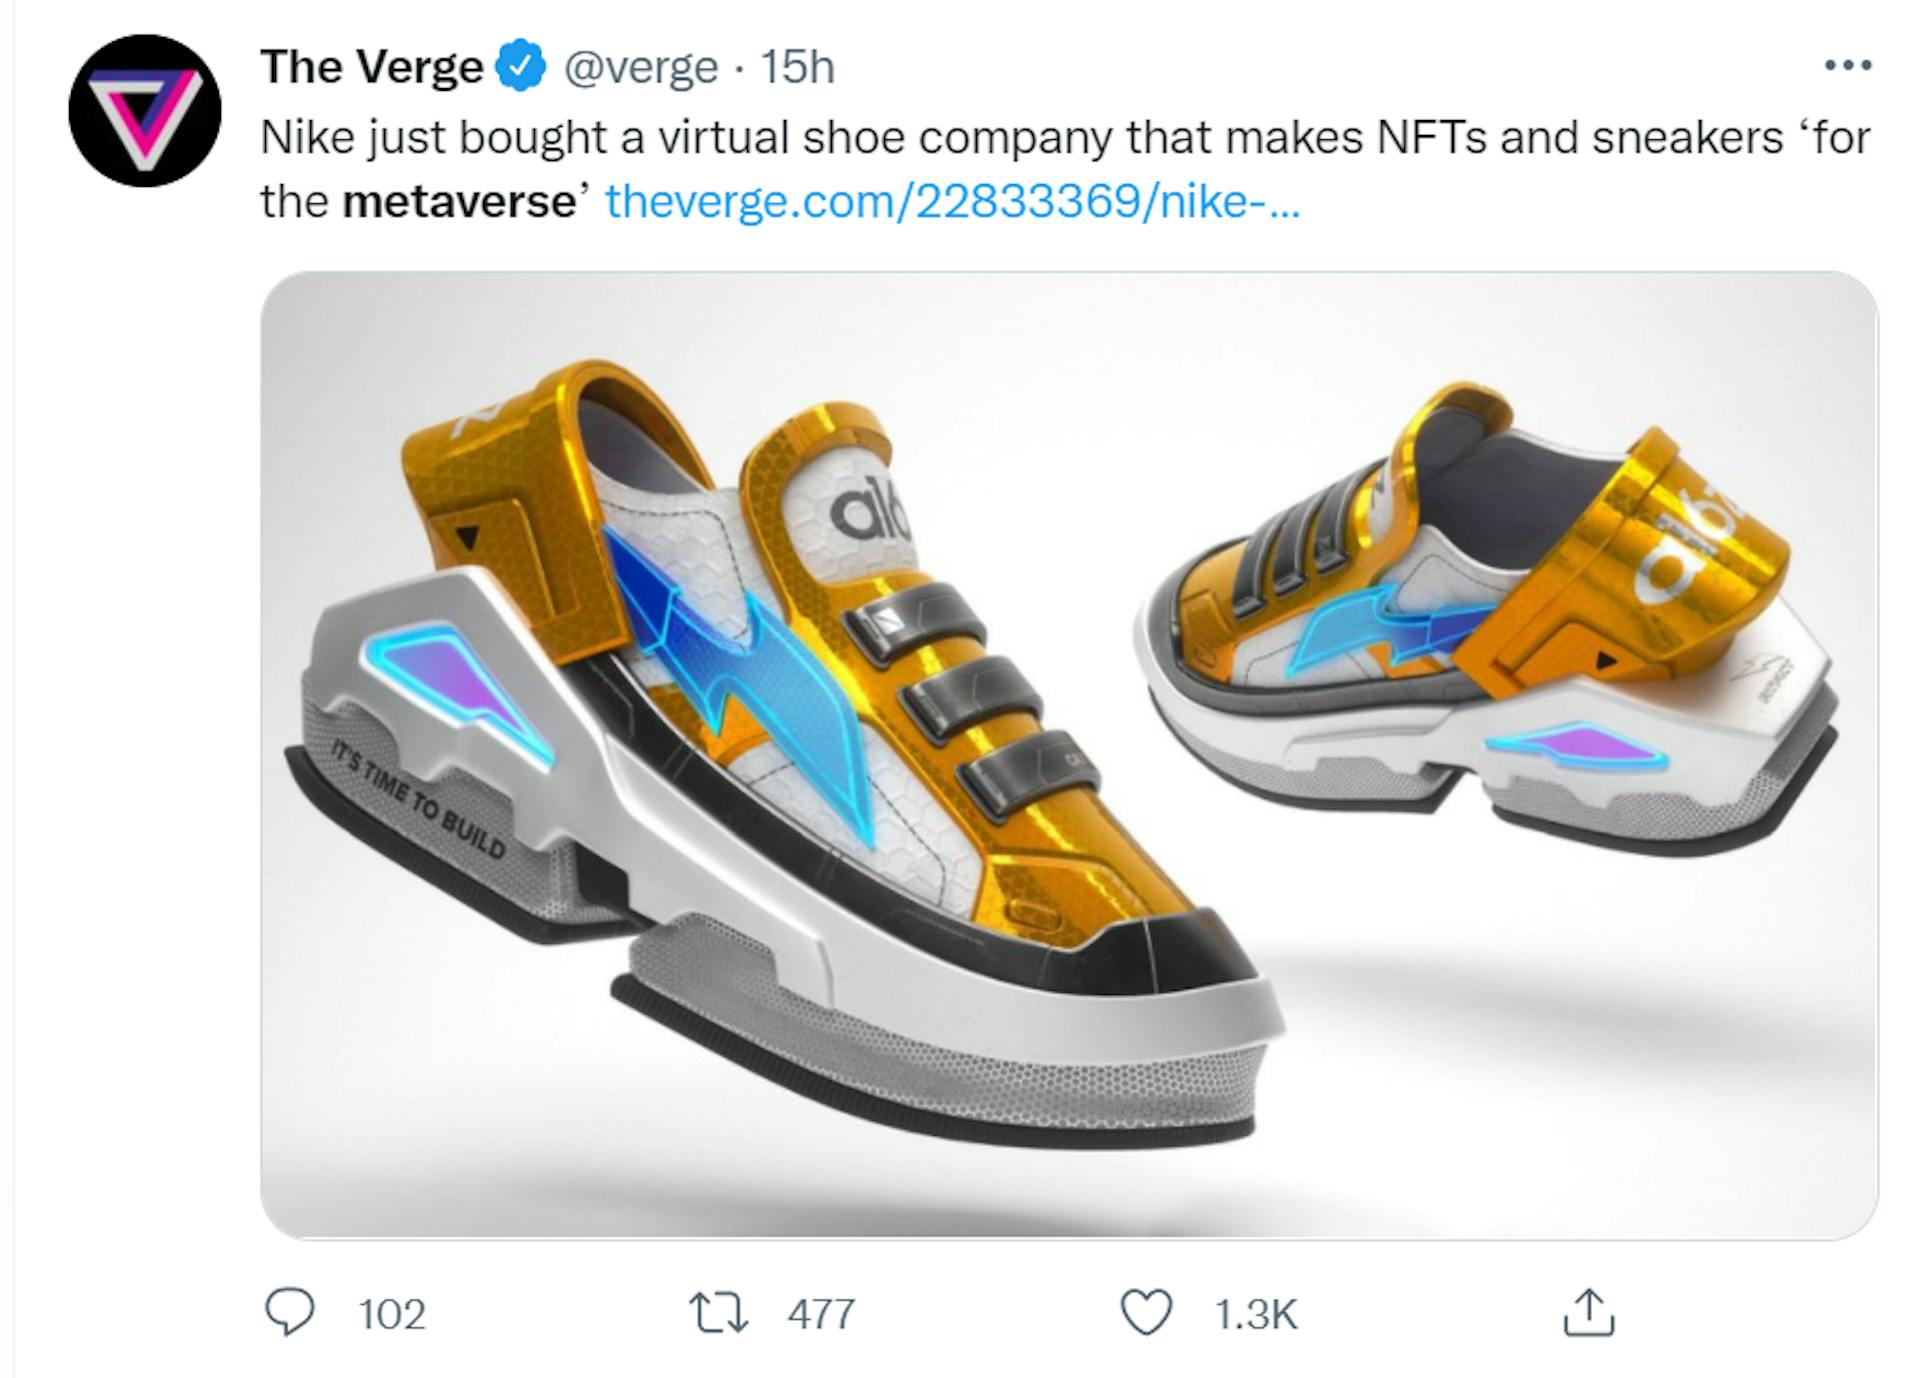 Having the motto "It's time to build" on a picture of a shoe doesn't actually mean you're building a metaverse